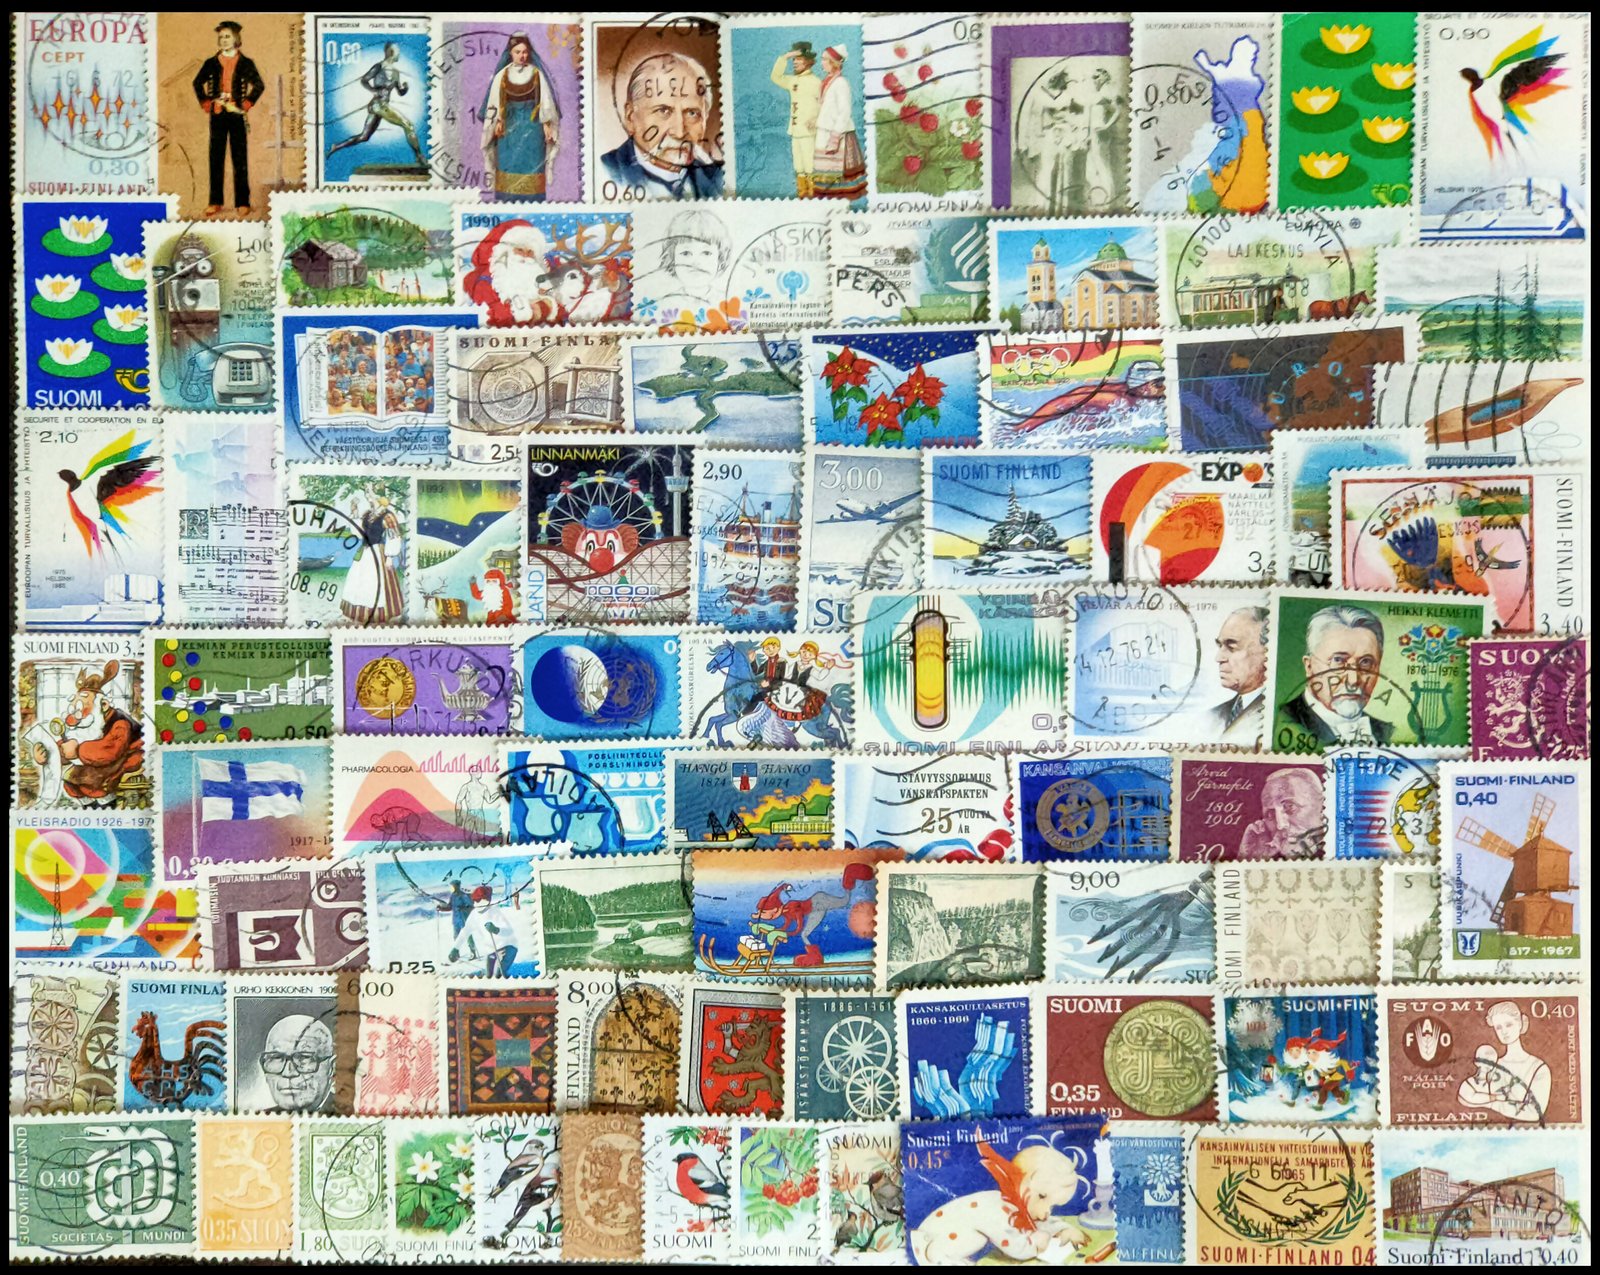 FINLAND 380 All Different Postage Stamps-Large & Small-Used- Old & New